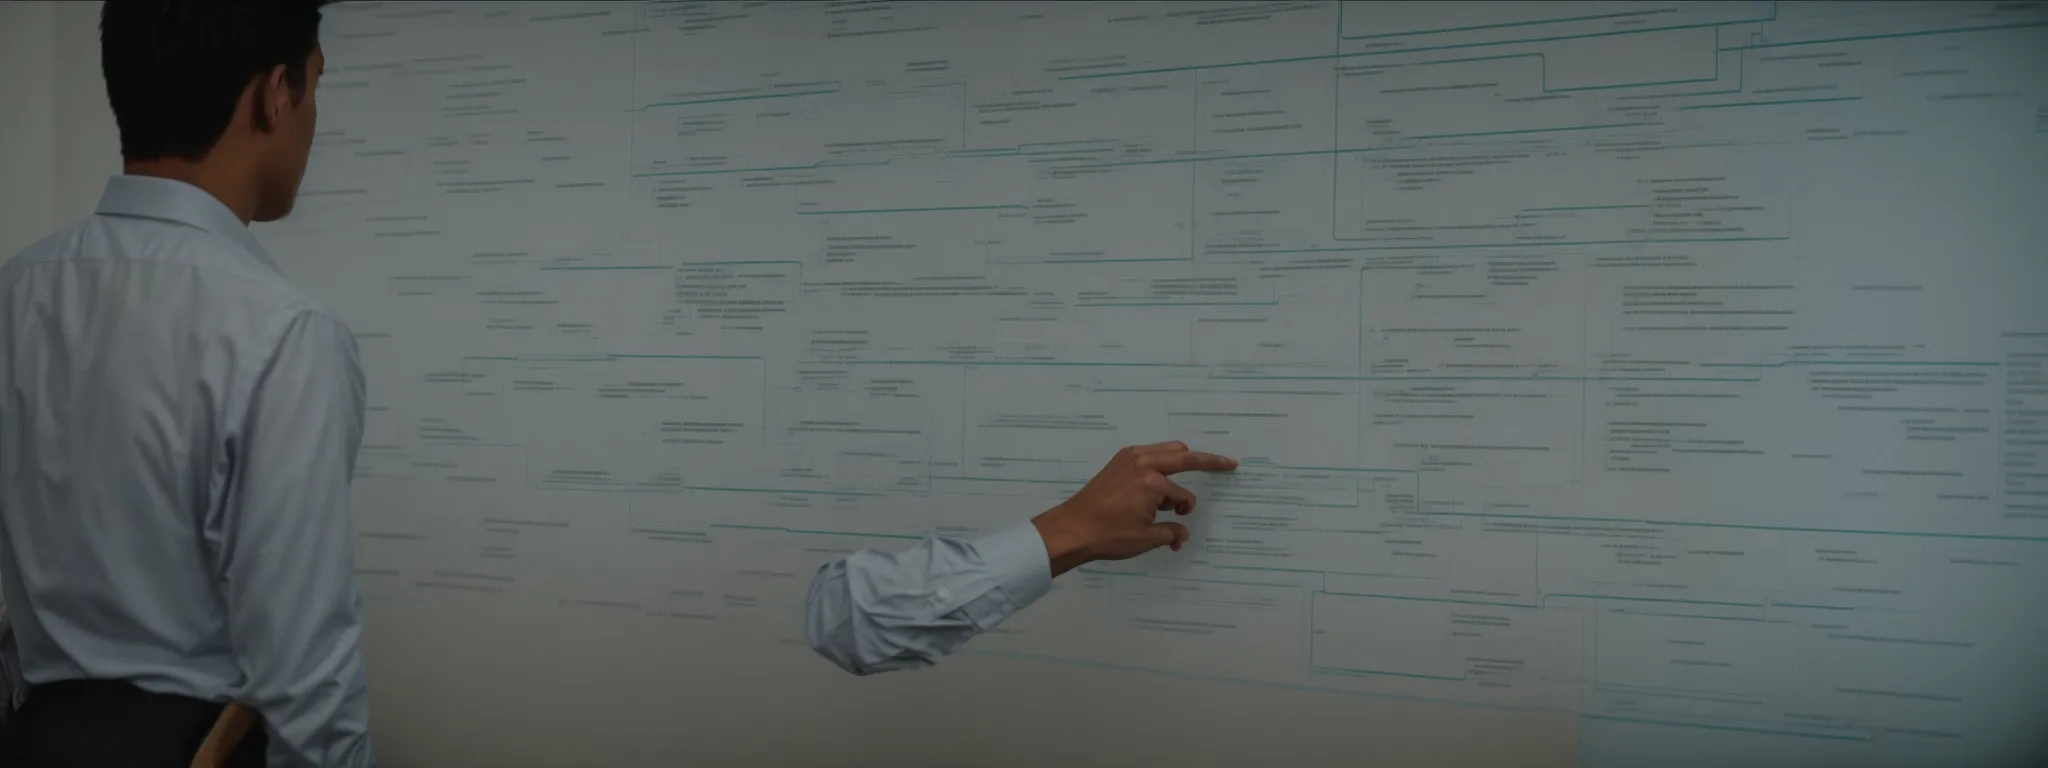 a person analyzing an organized, hierarchical diagram representing a website’s structure on a computer screen.